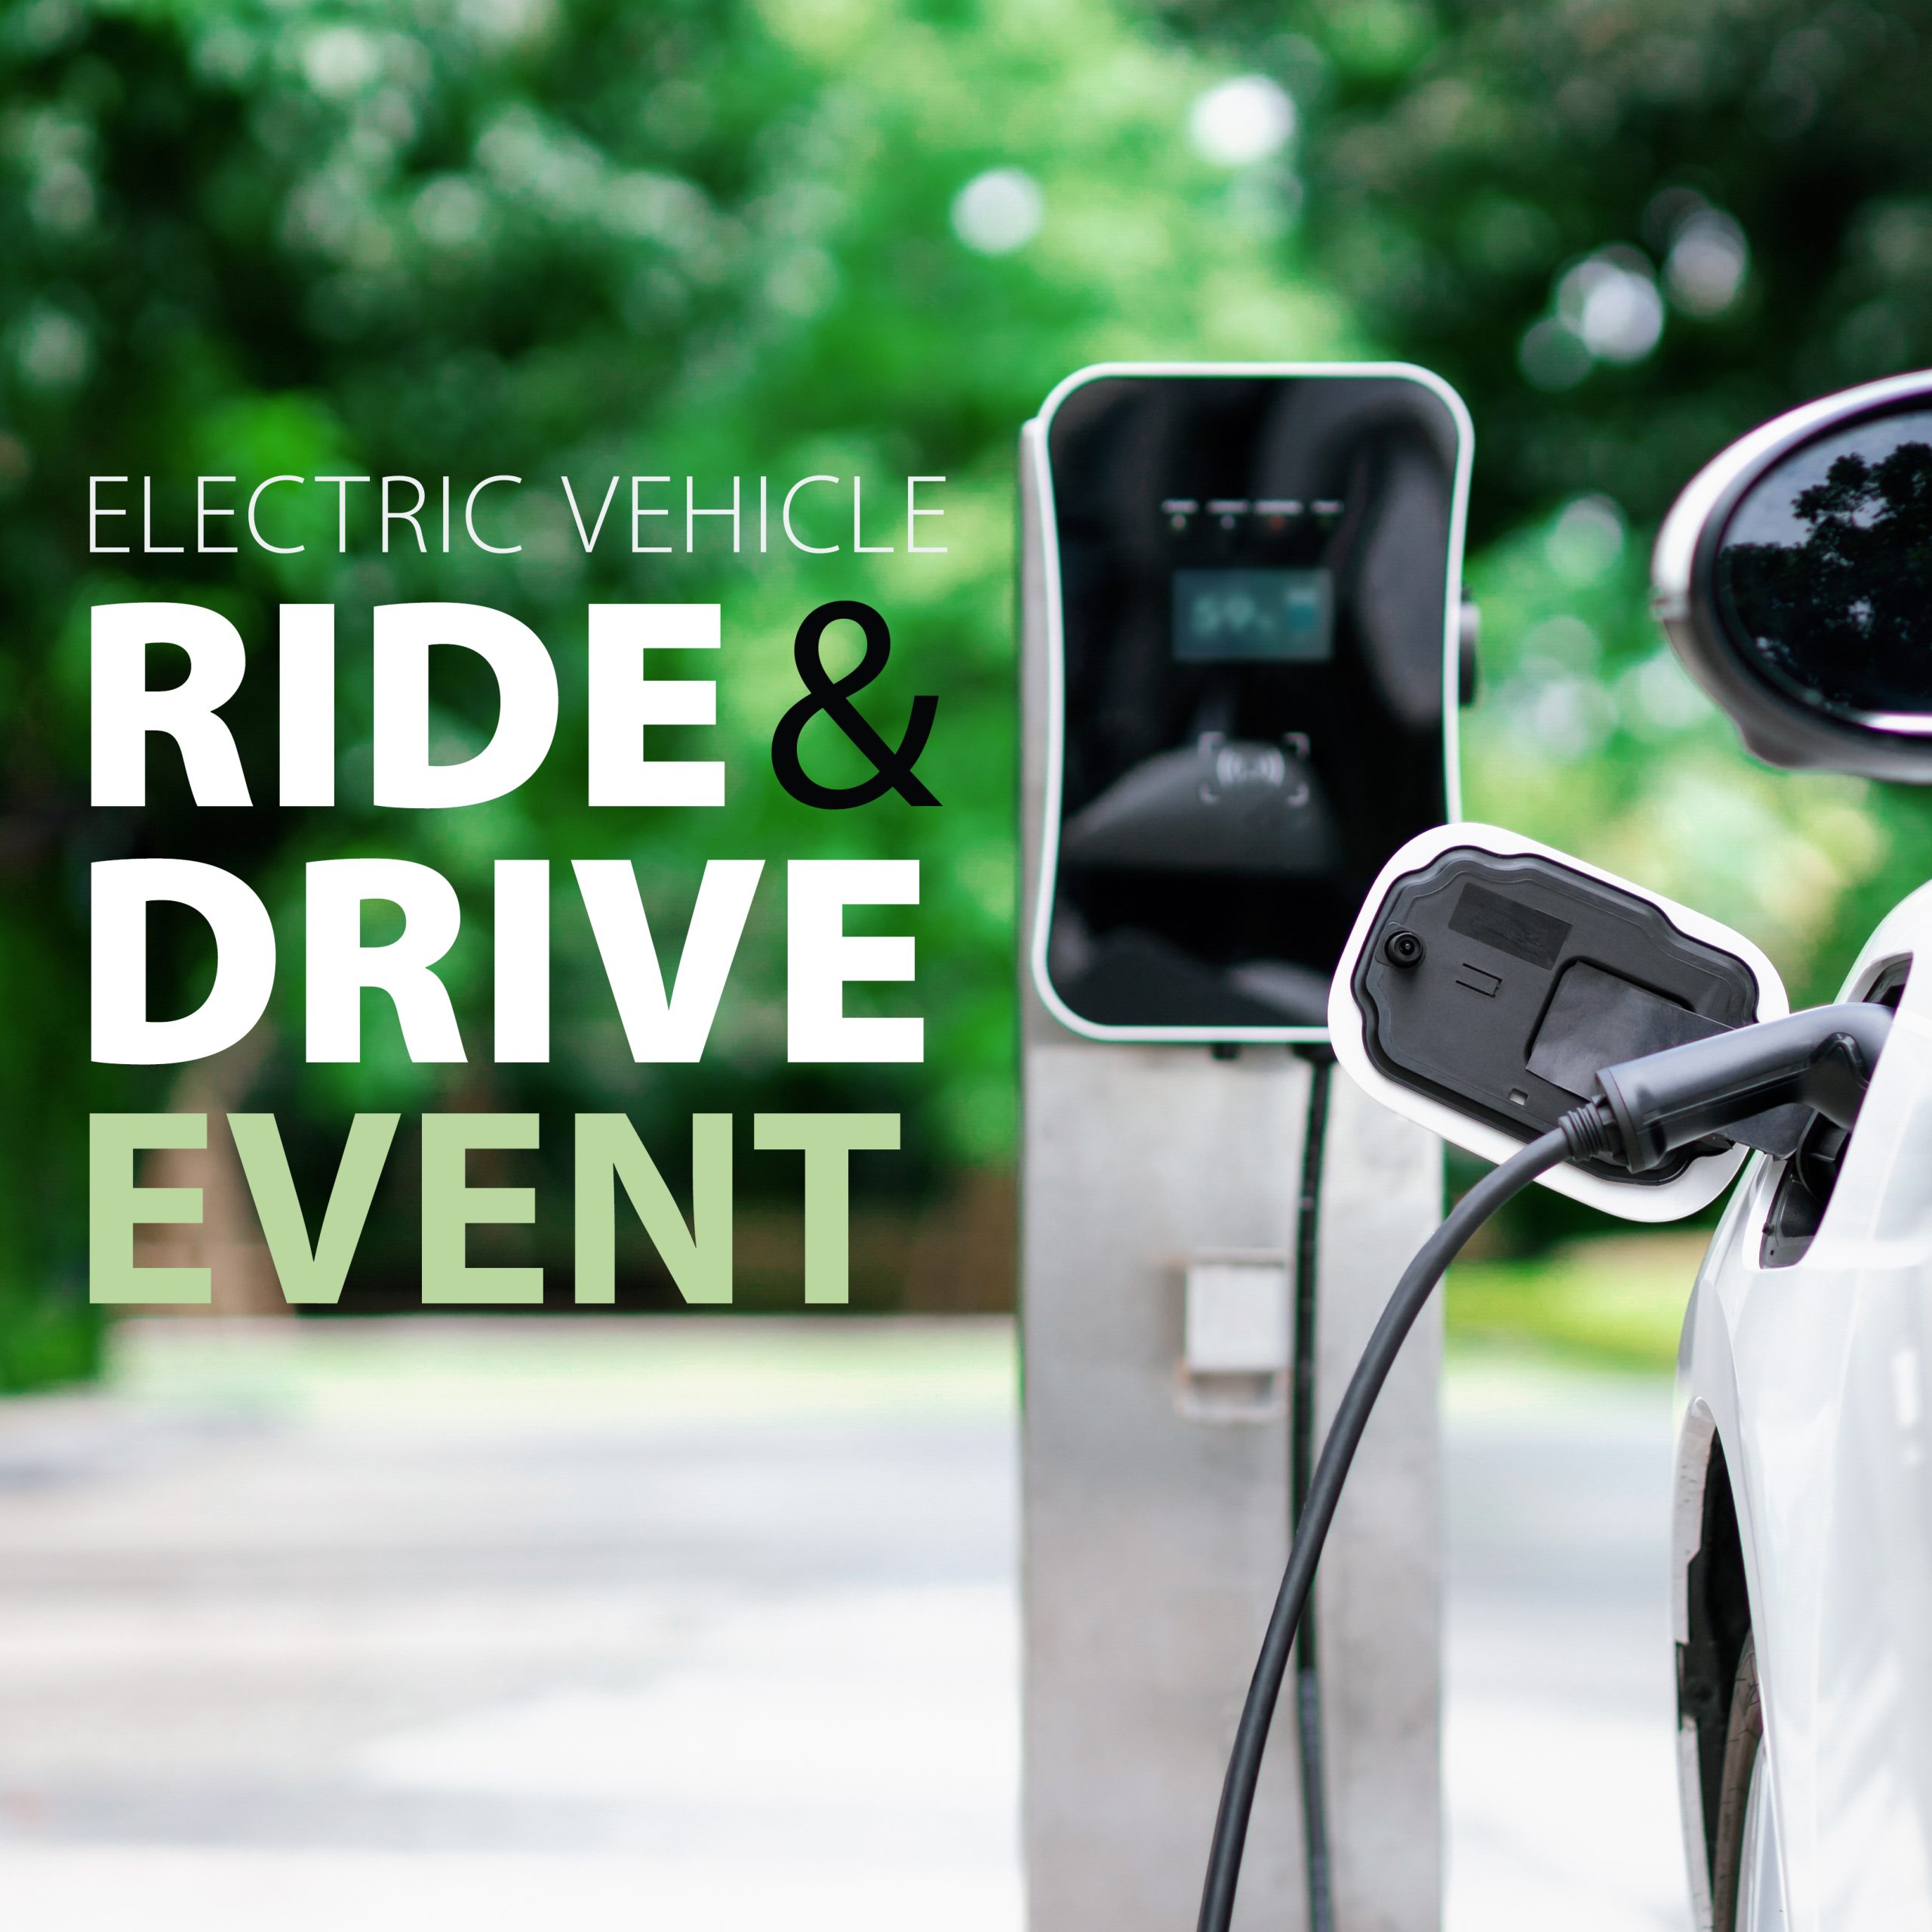 Electric vehicle ride and drive event banner